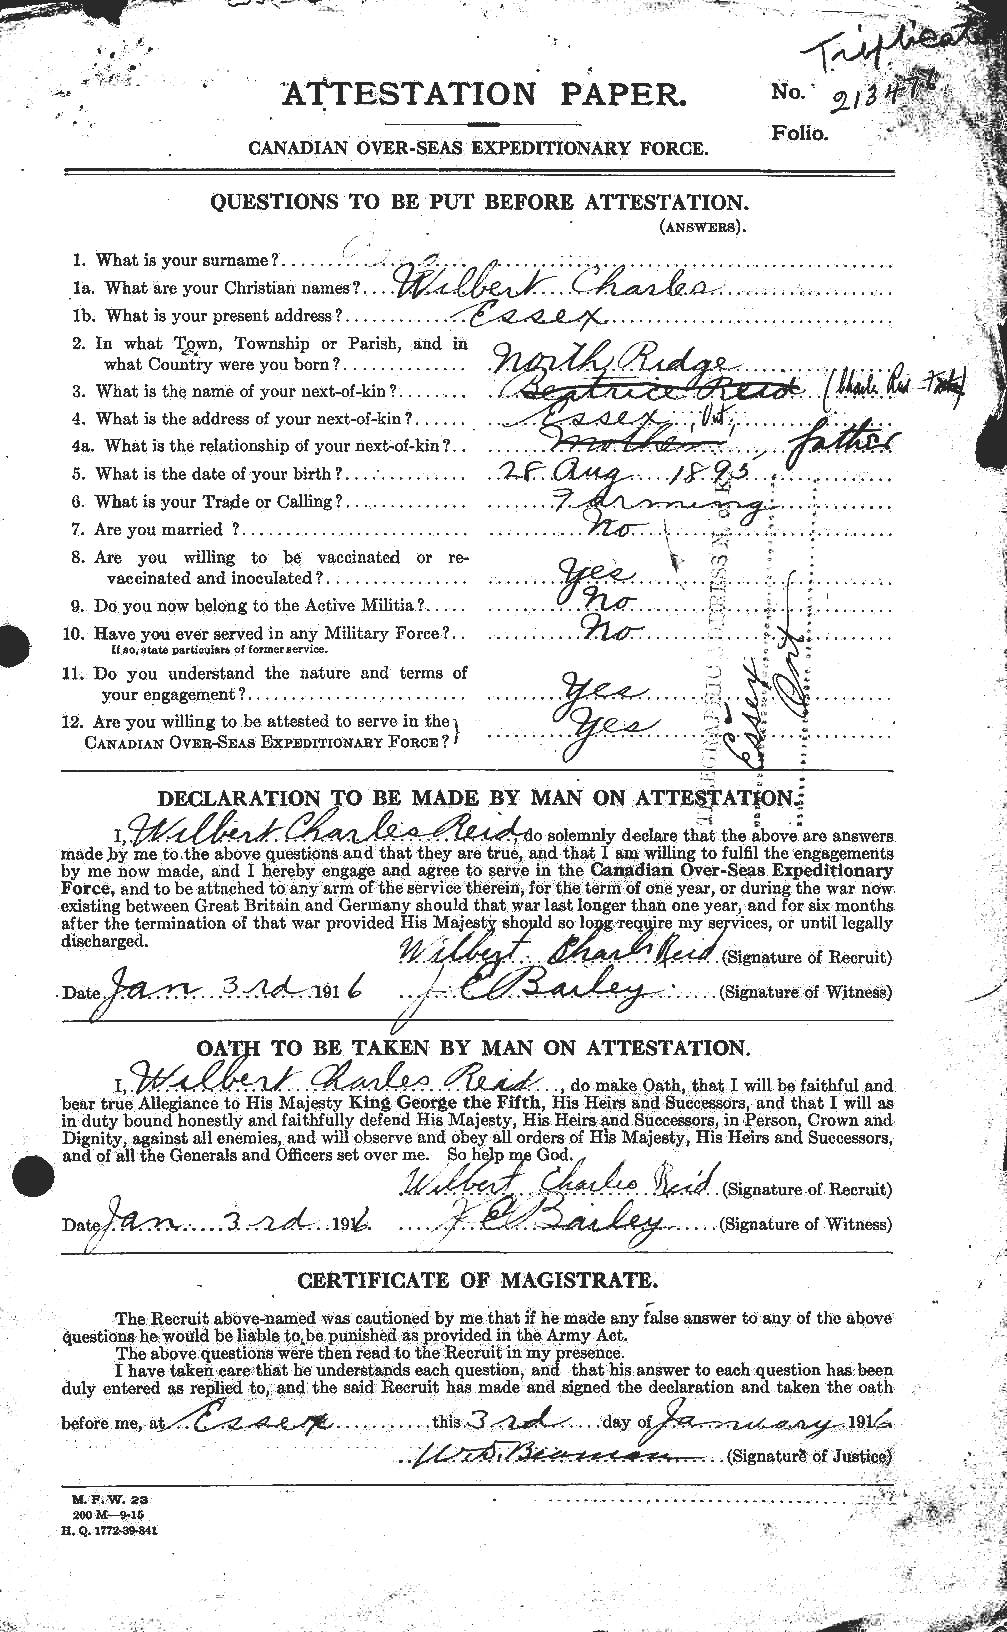 Personnel Records of the First World War - CEF 596900a